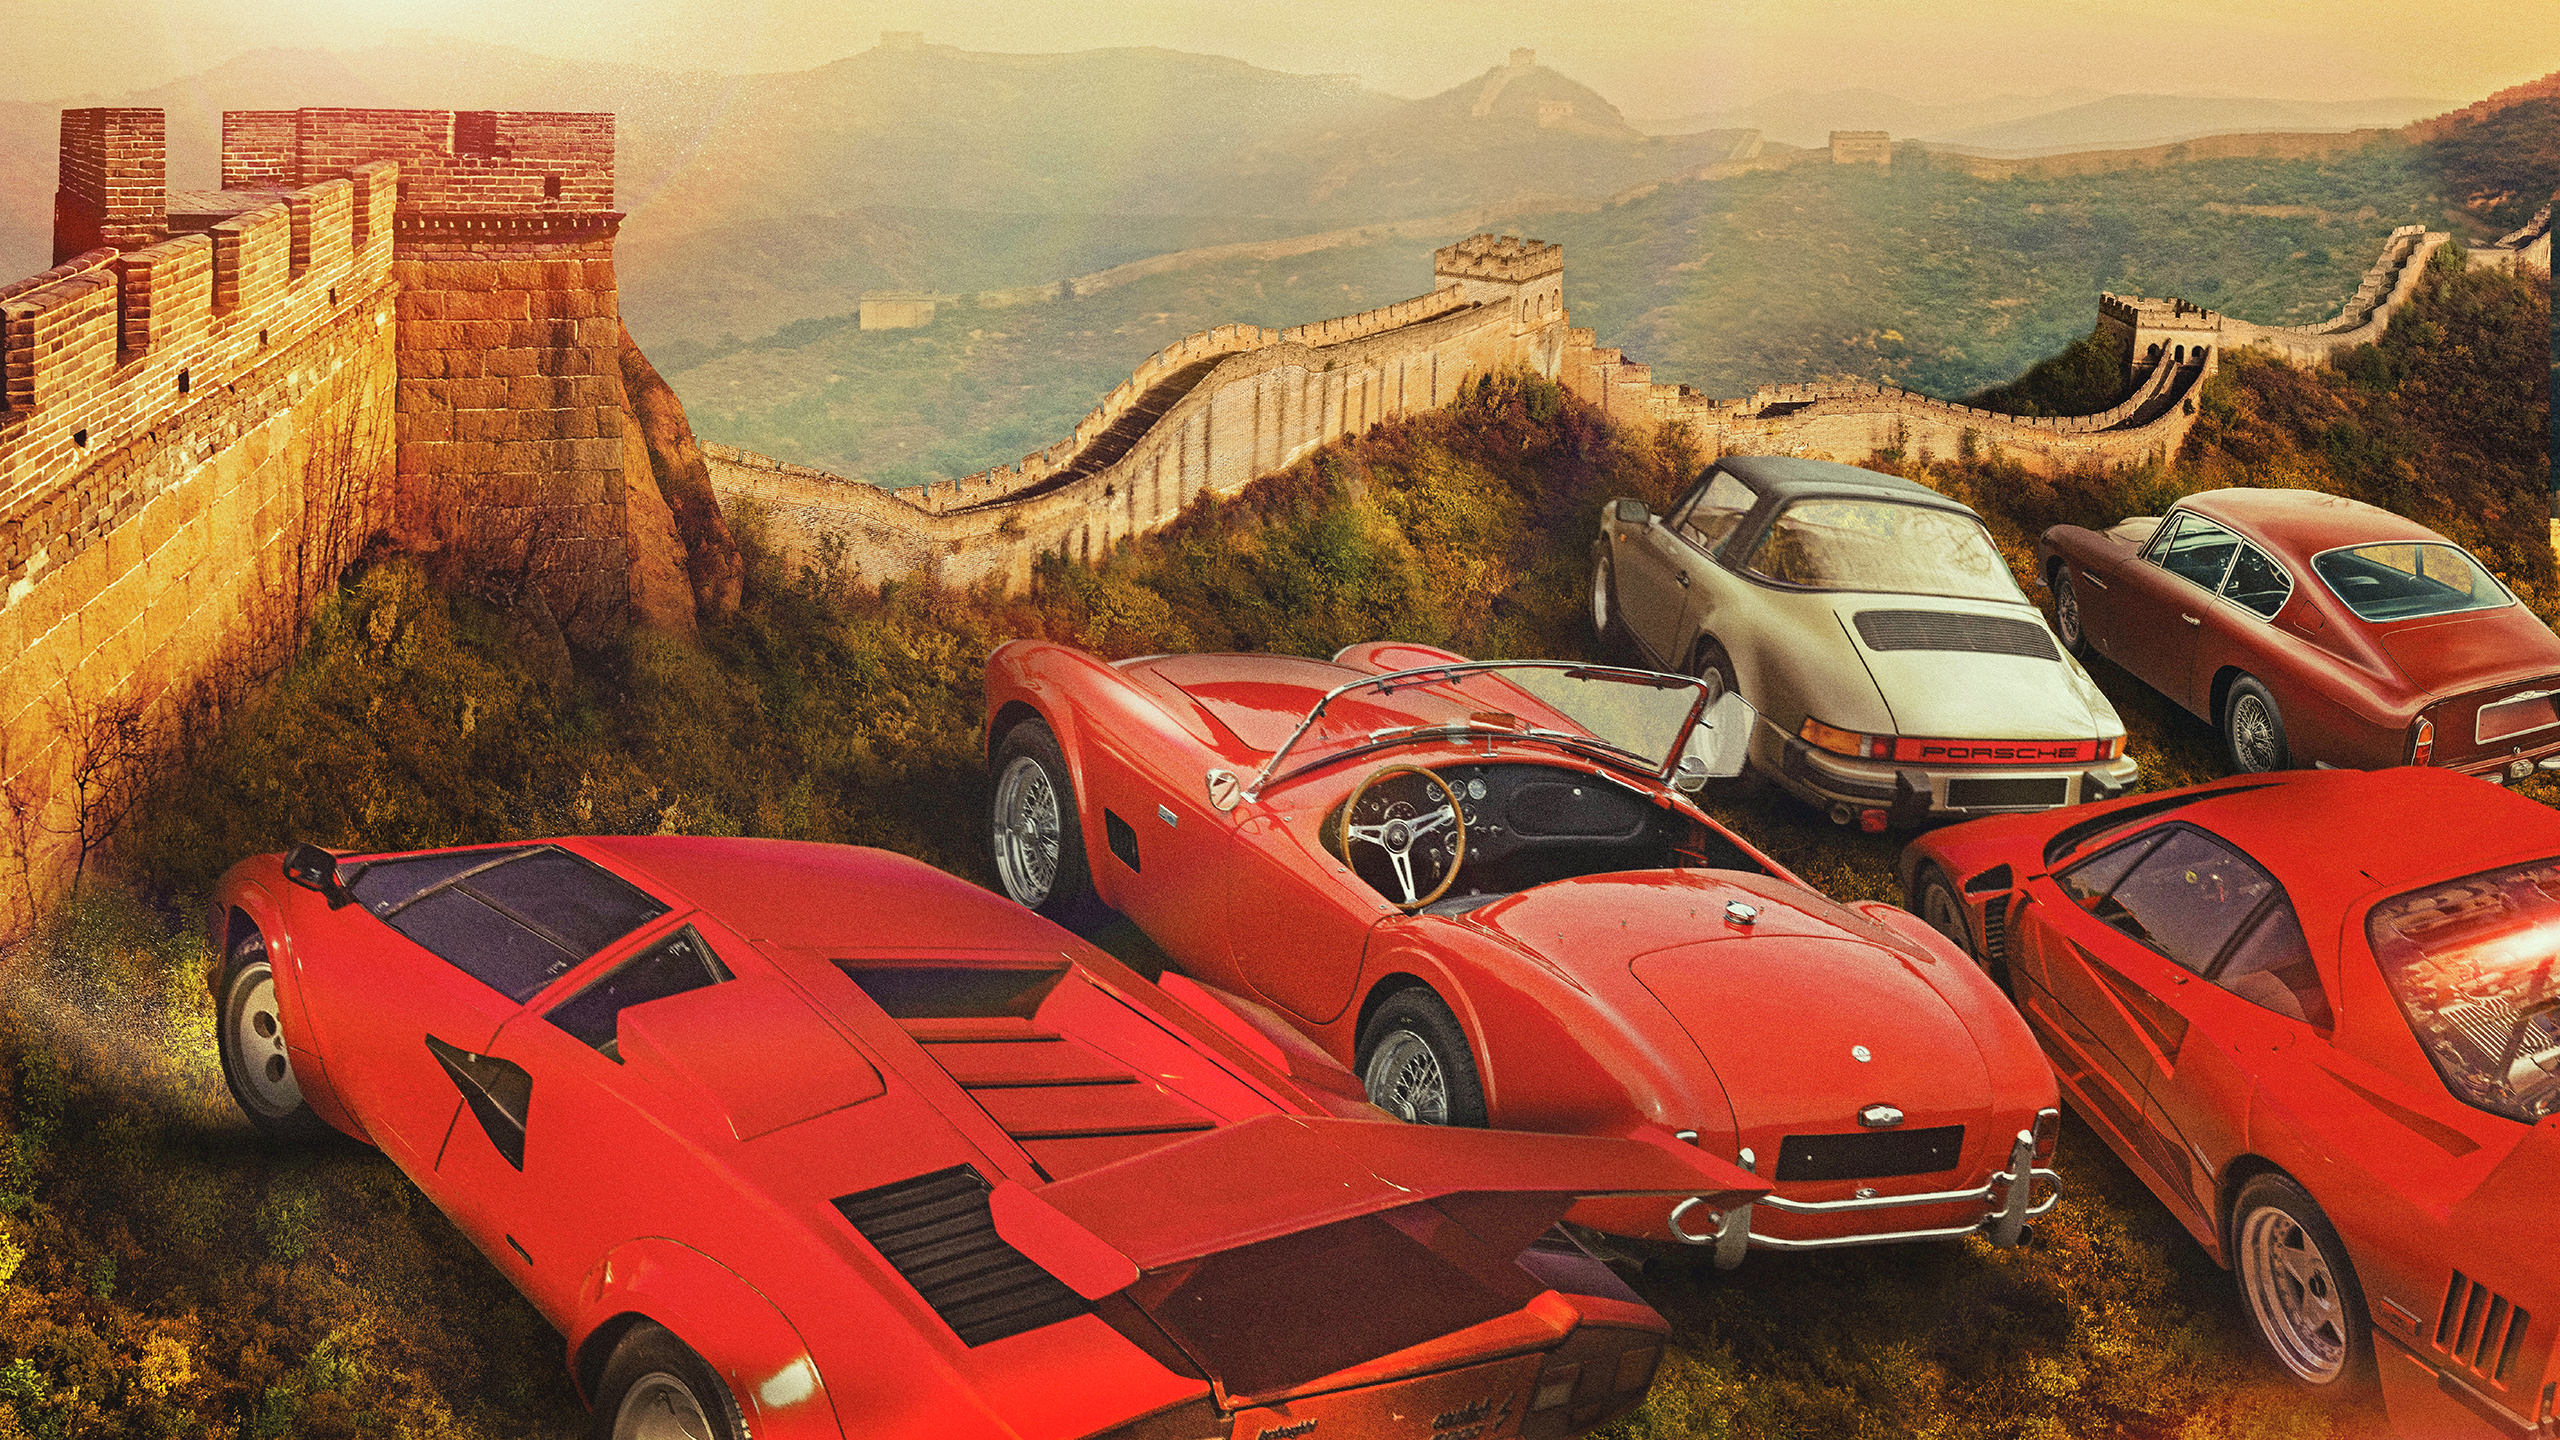 China's mysterious classic car market